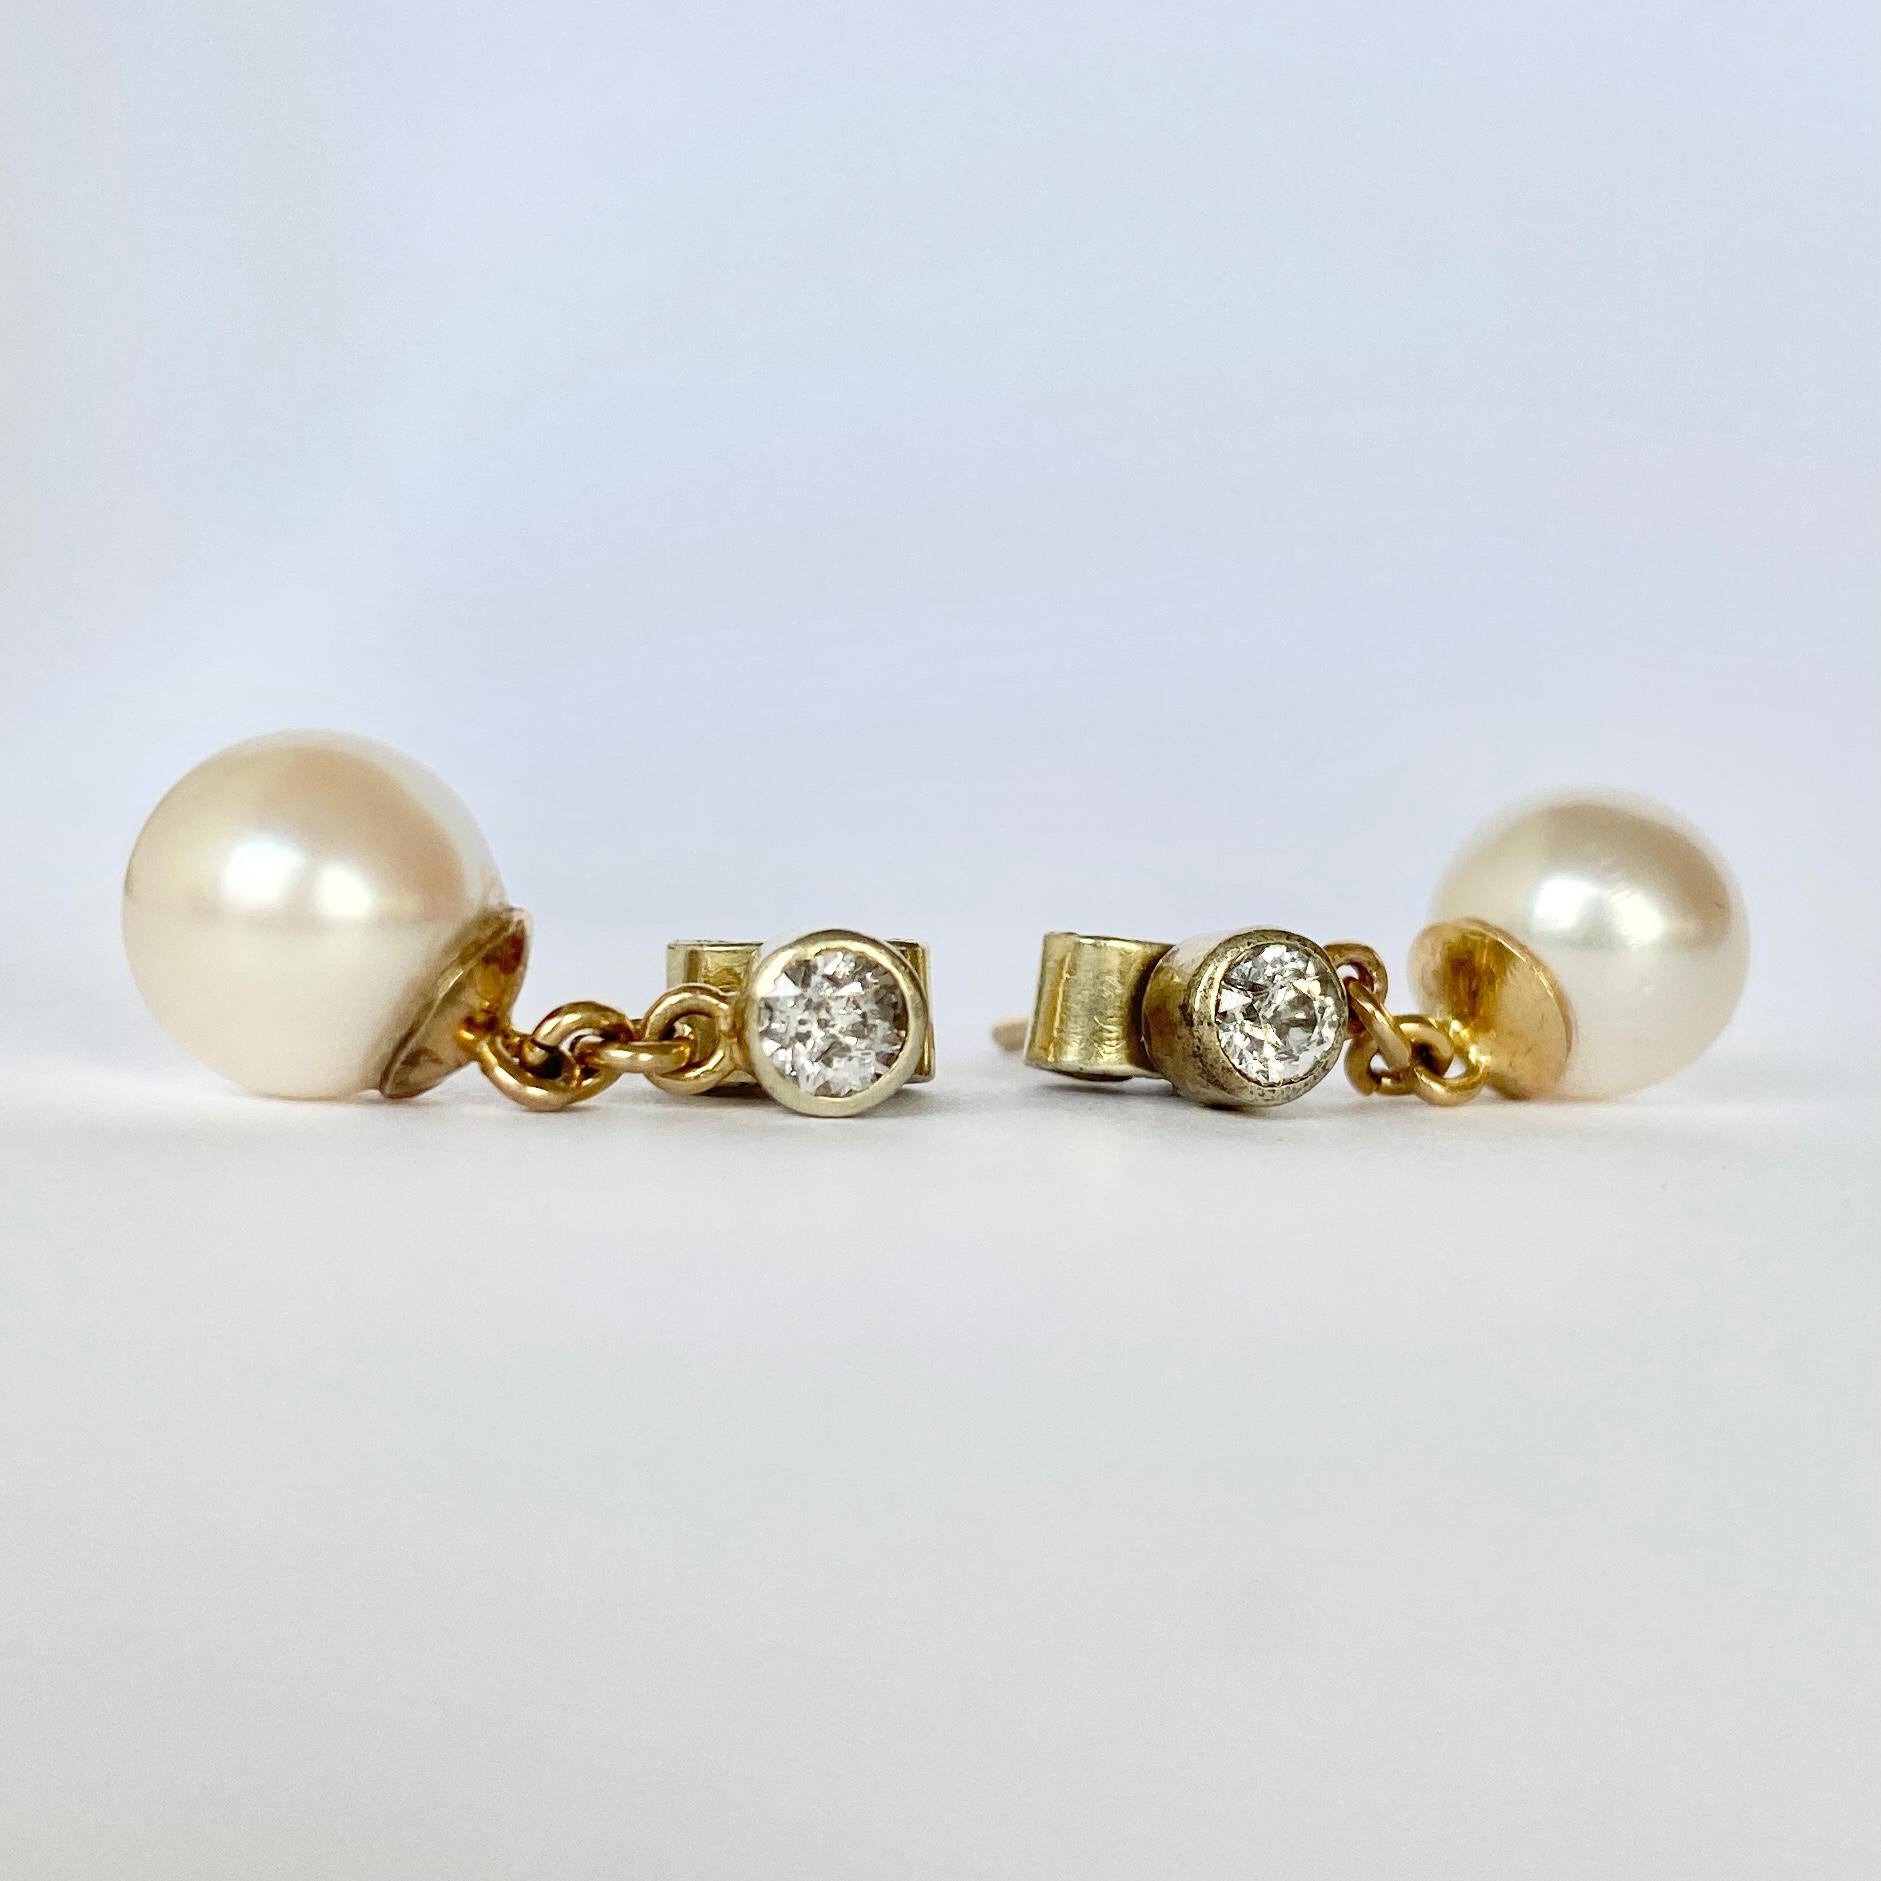 These gorgeous pearl drop earrings also hold diamonds to add a little sparkle! The pearls are bright and smooth and the diamonds measure 25pts per earring. These come in their original Burlington Arcade box. 

Drop from ear: 18mm

Weight: 3.4g